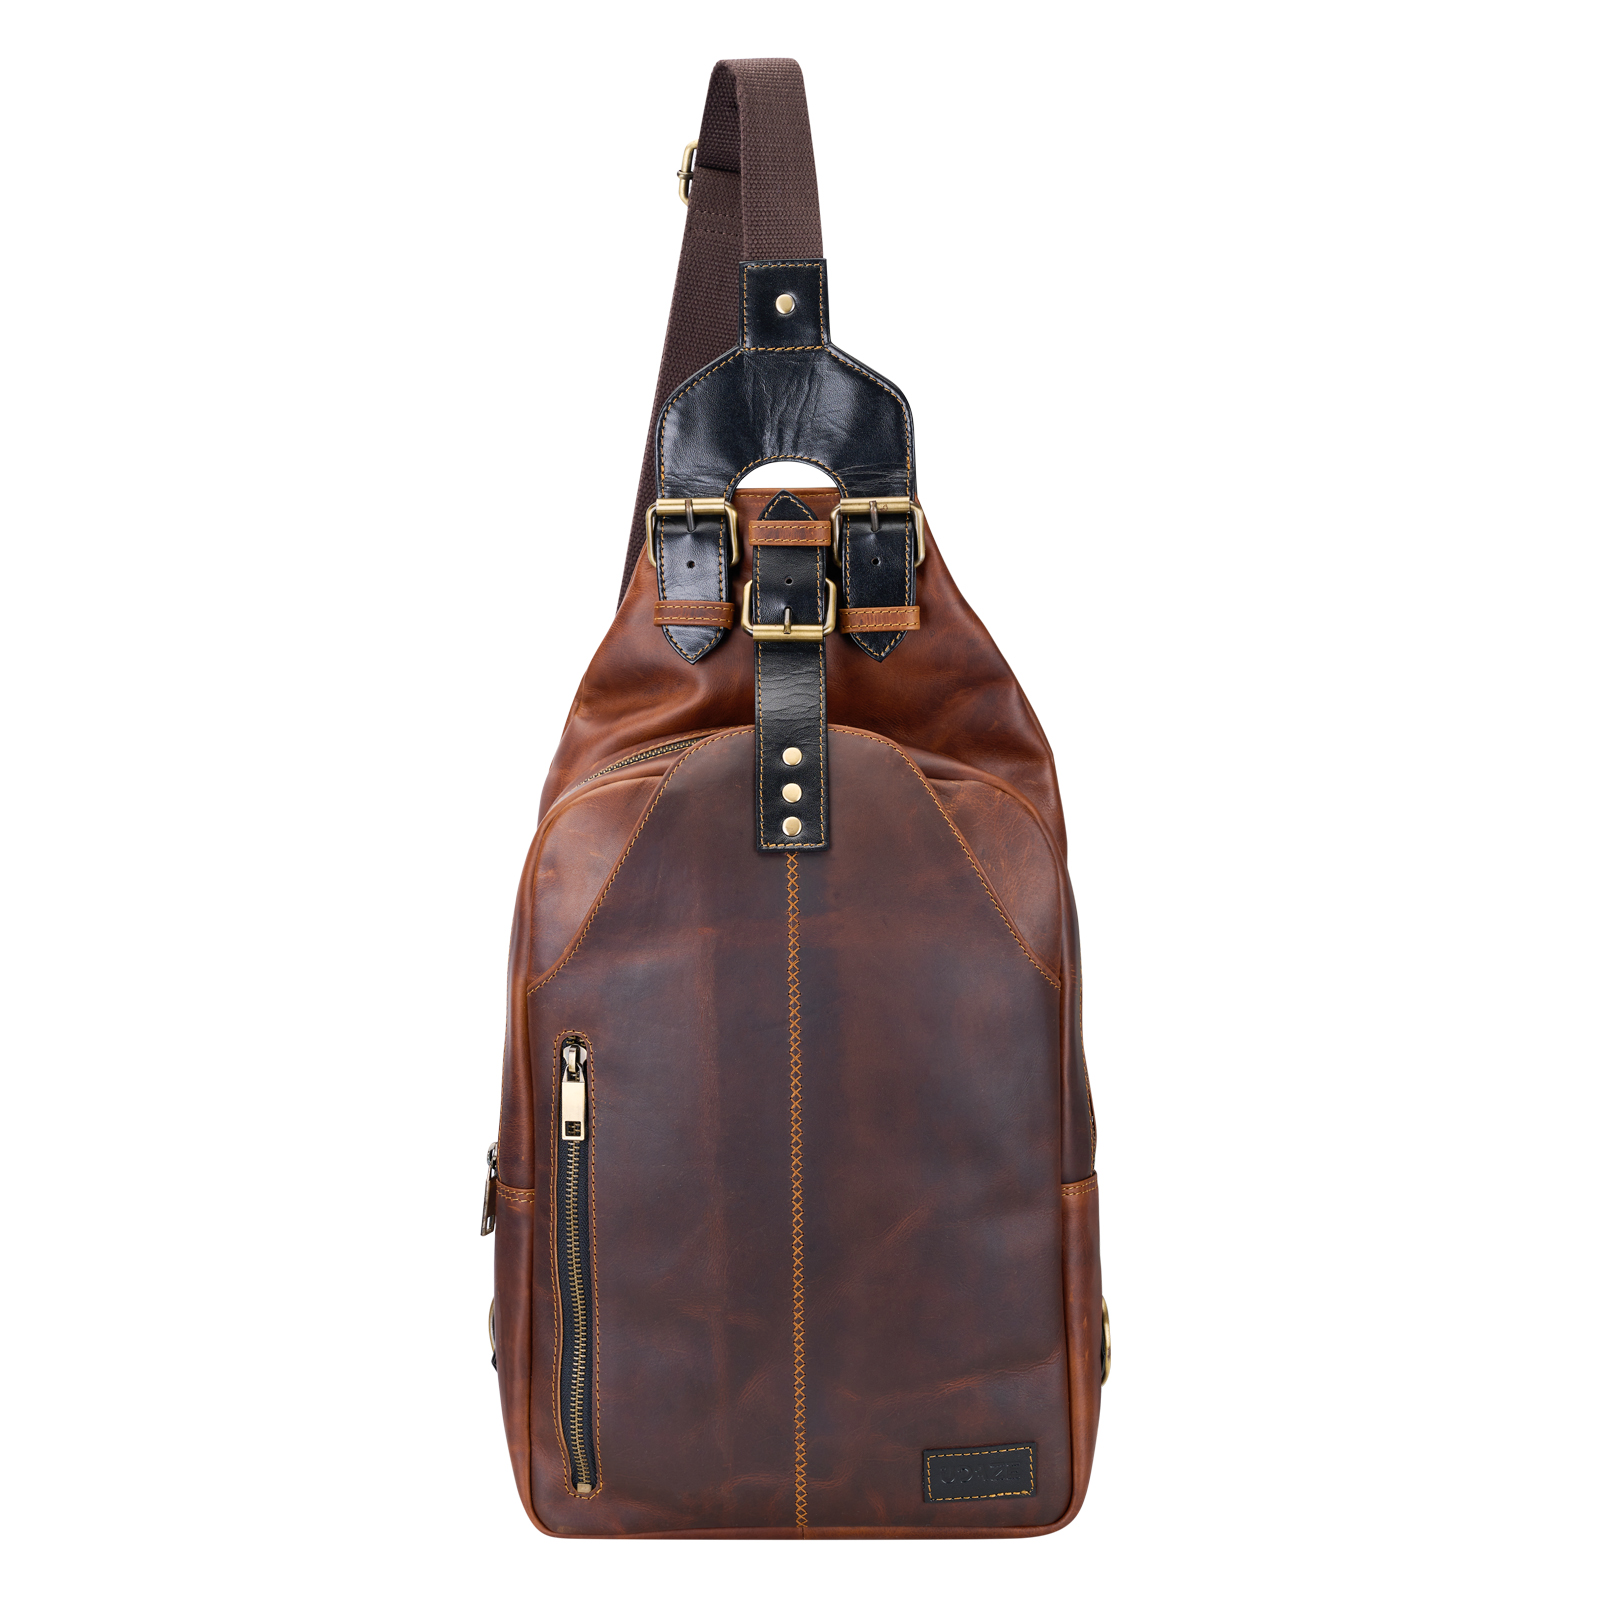 Upgrade Your Wardrobe With The Leather Designer Sling Bag